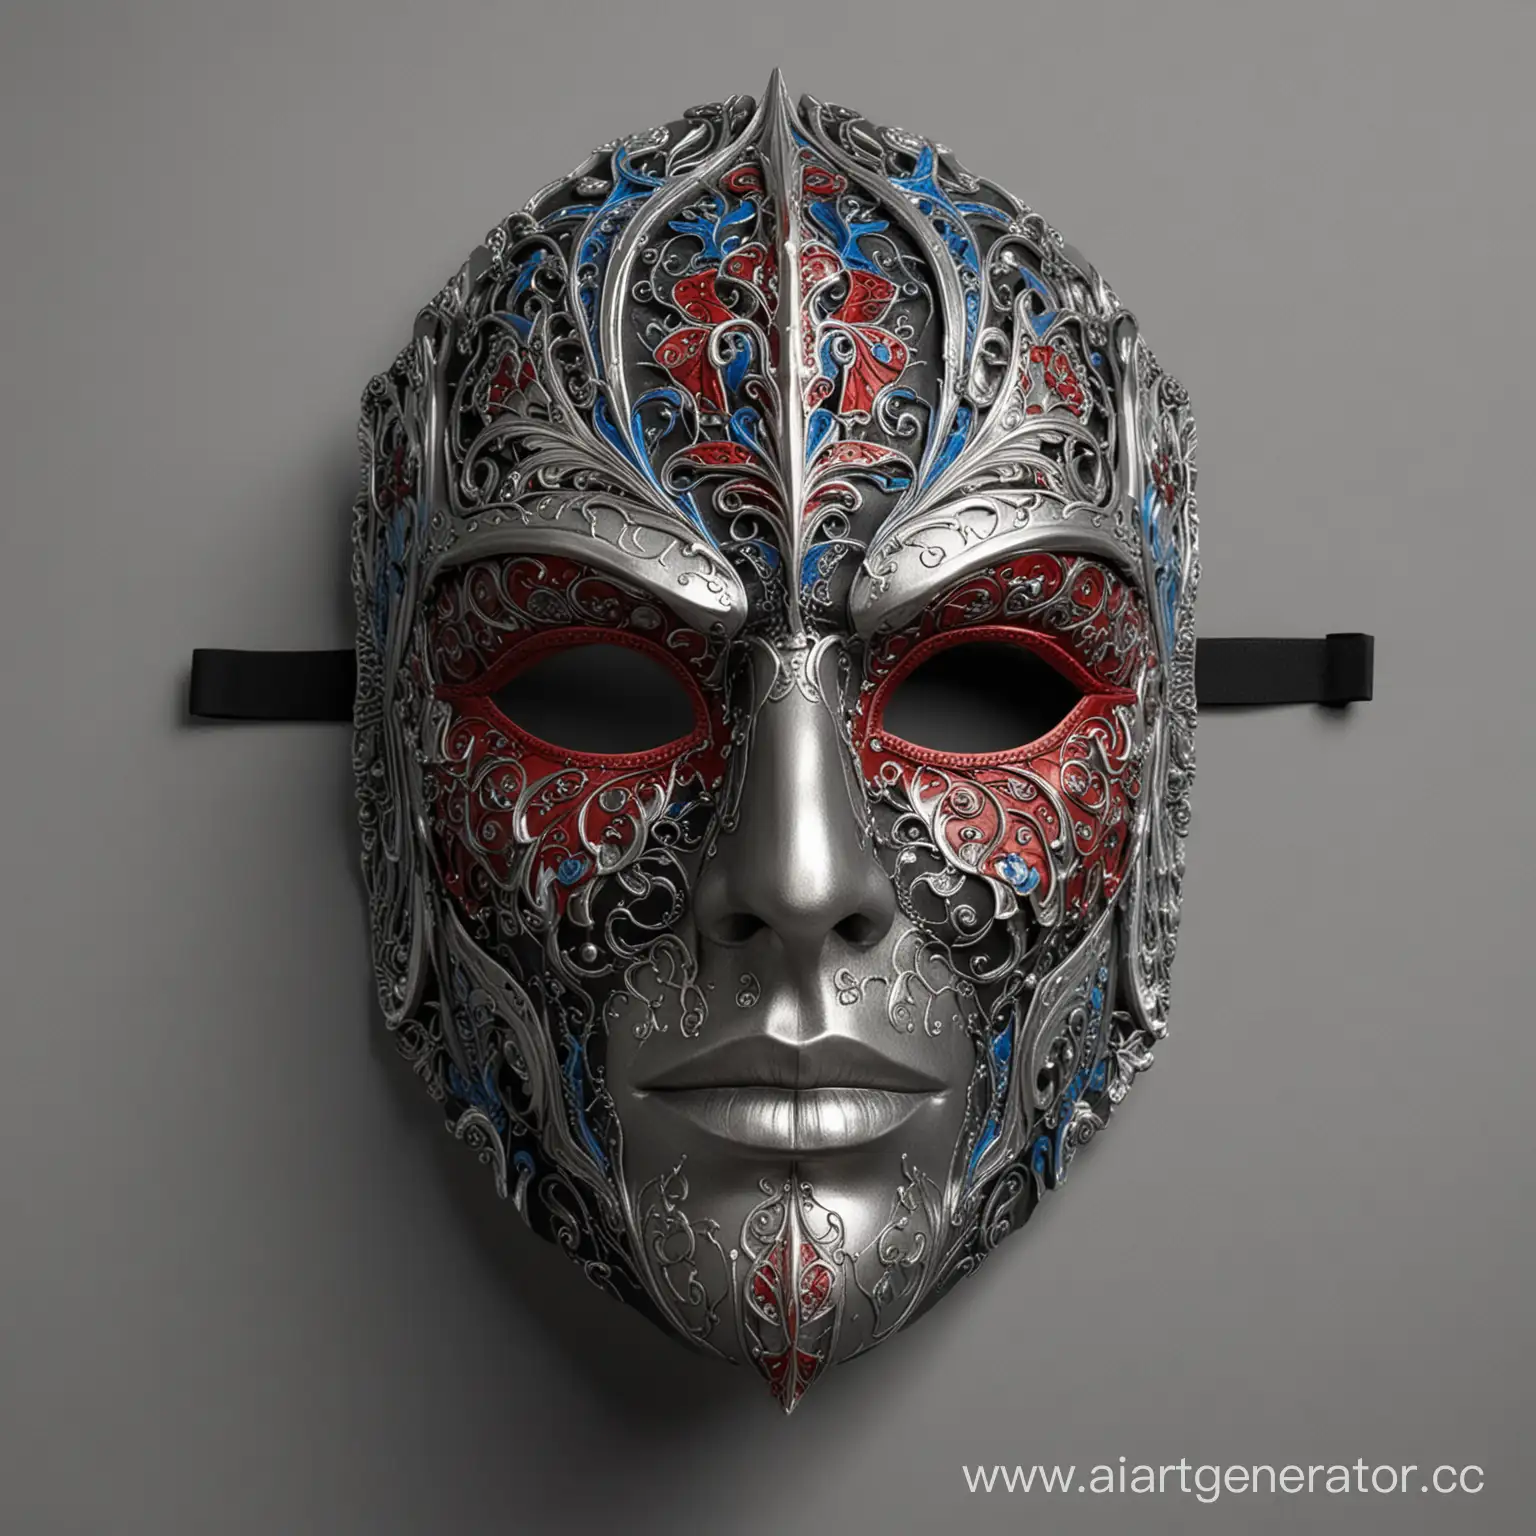 Intricately-Crafted-Columbine-Interior-Mask-Symmetrical-Black-Silver-White-Red-and-Blue-Details